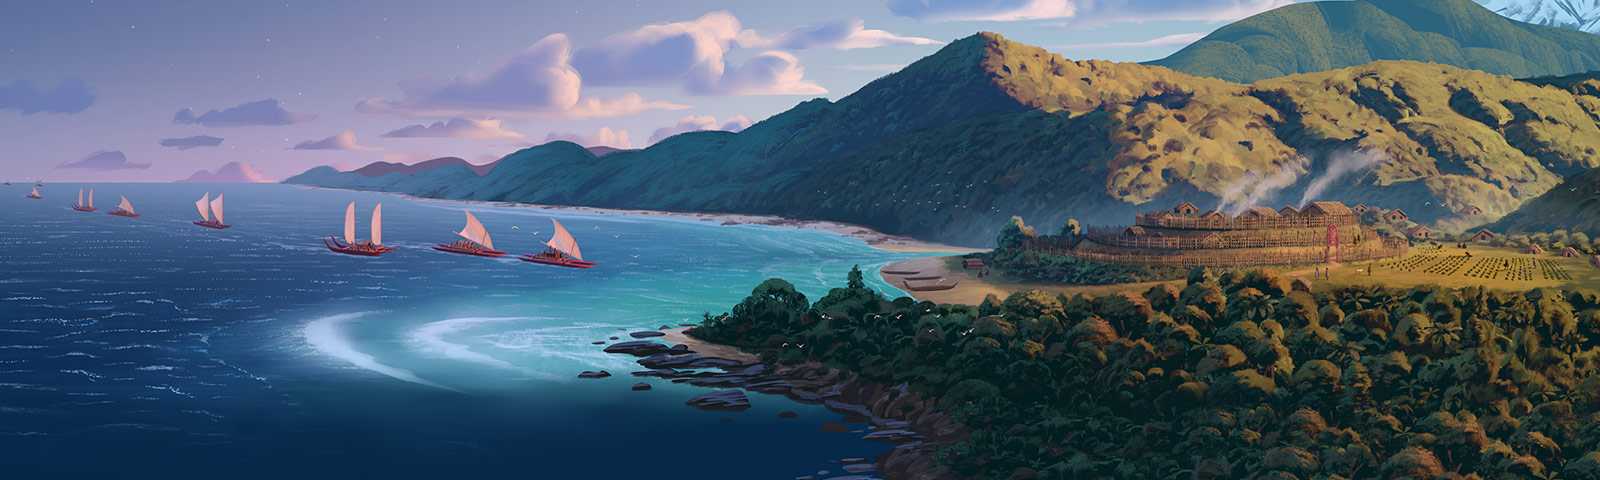 Colour artwork showing a fleet of waka sailing towards the coastline. A pā overlooks the coast, surrounded by mountains and forest.